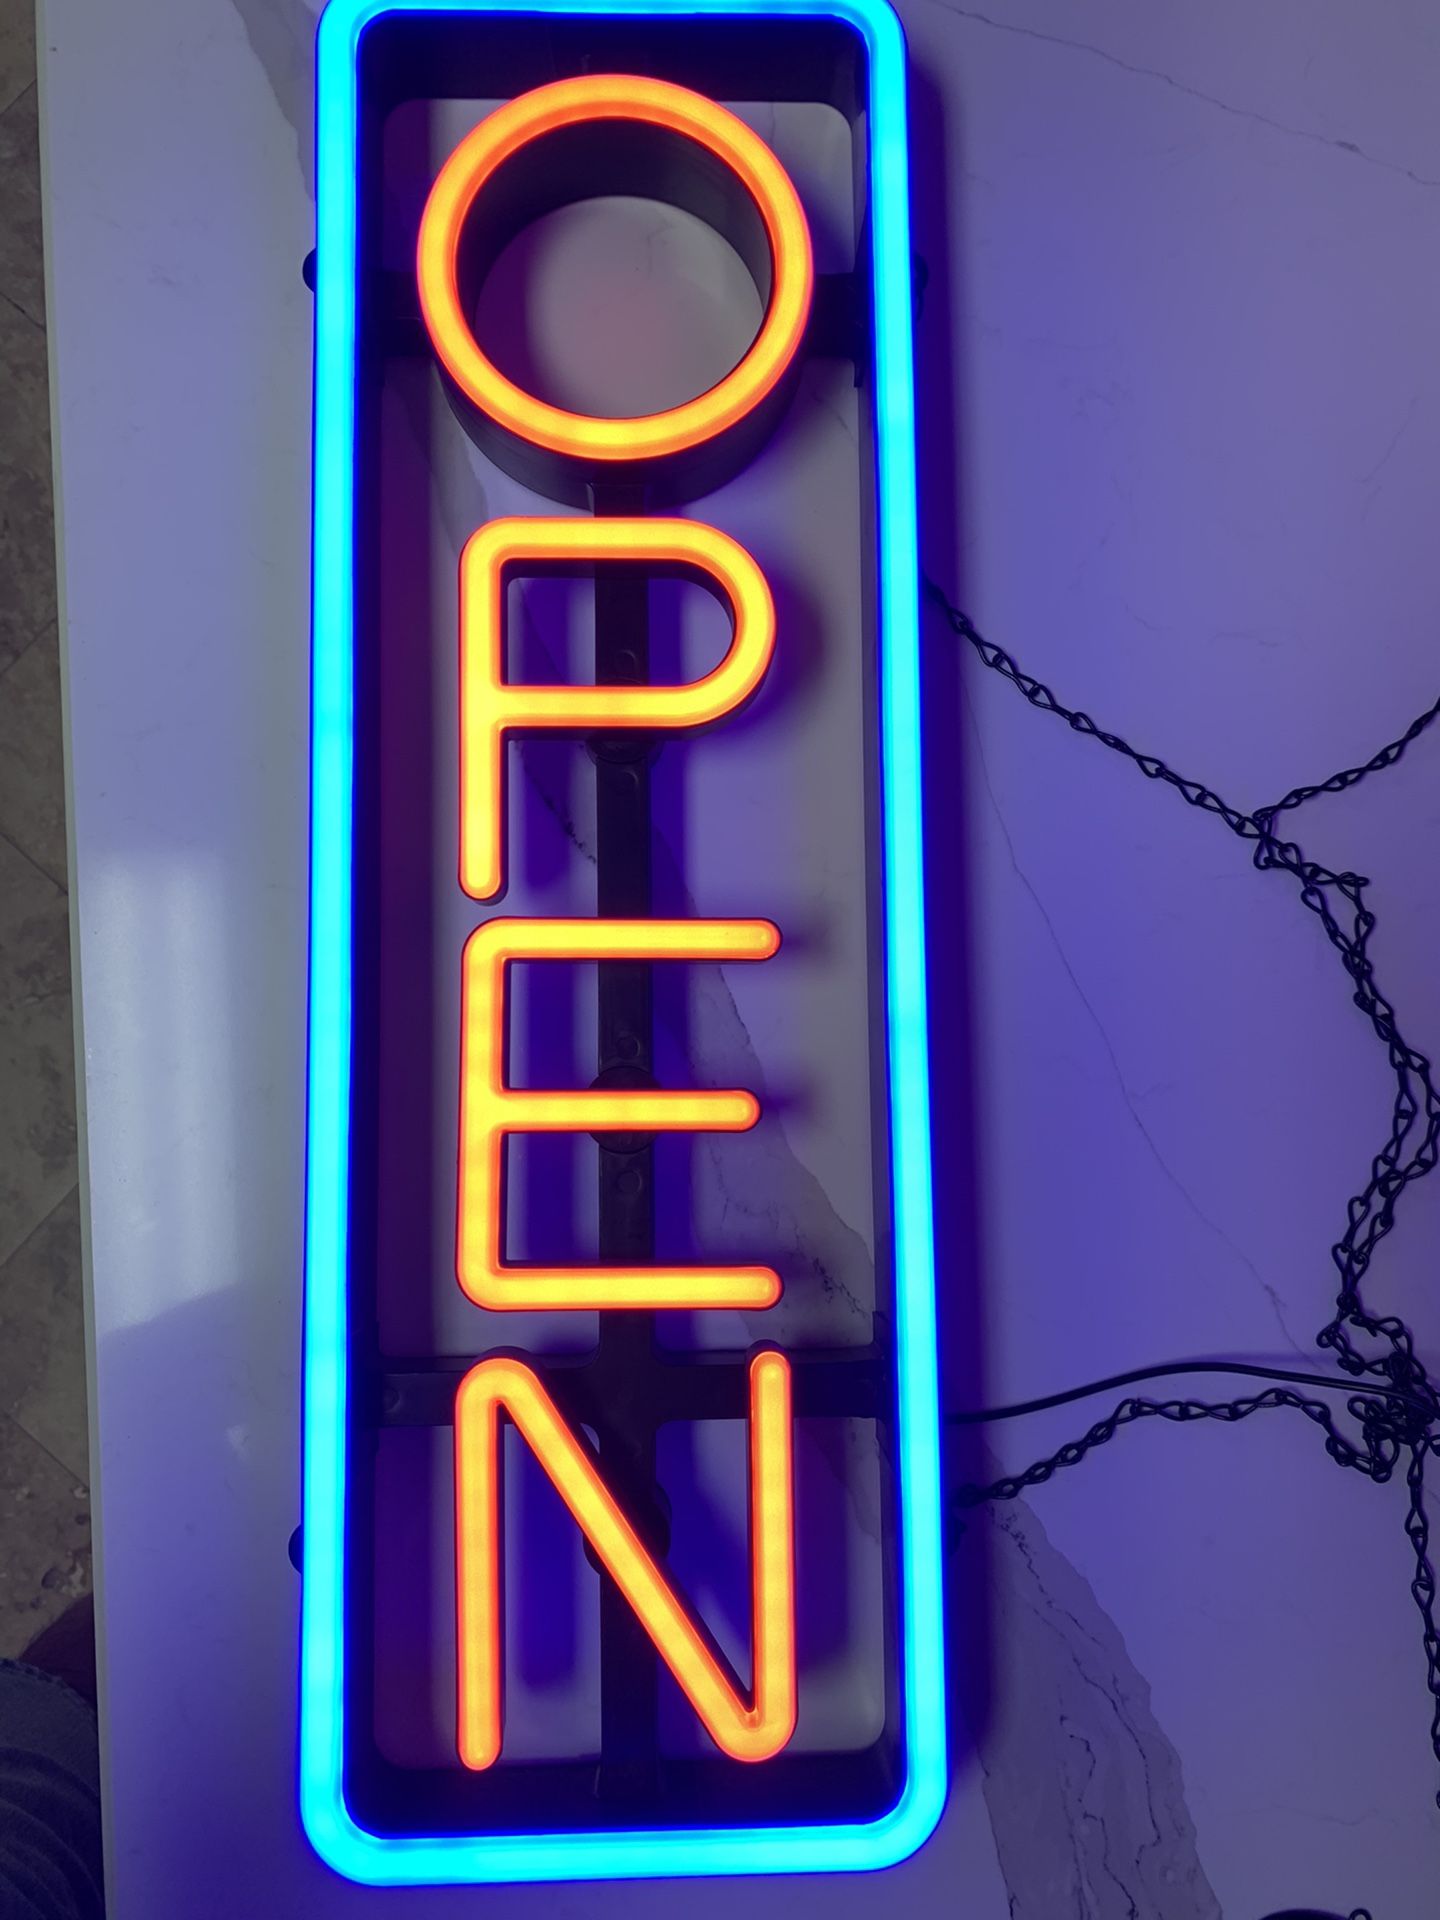 Open sign (Neon) with remote control